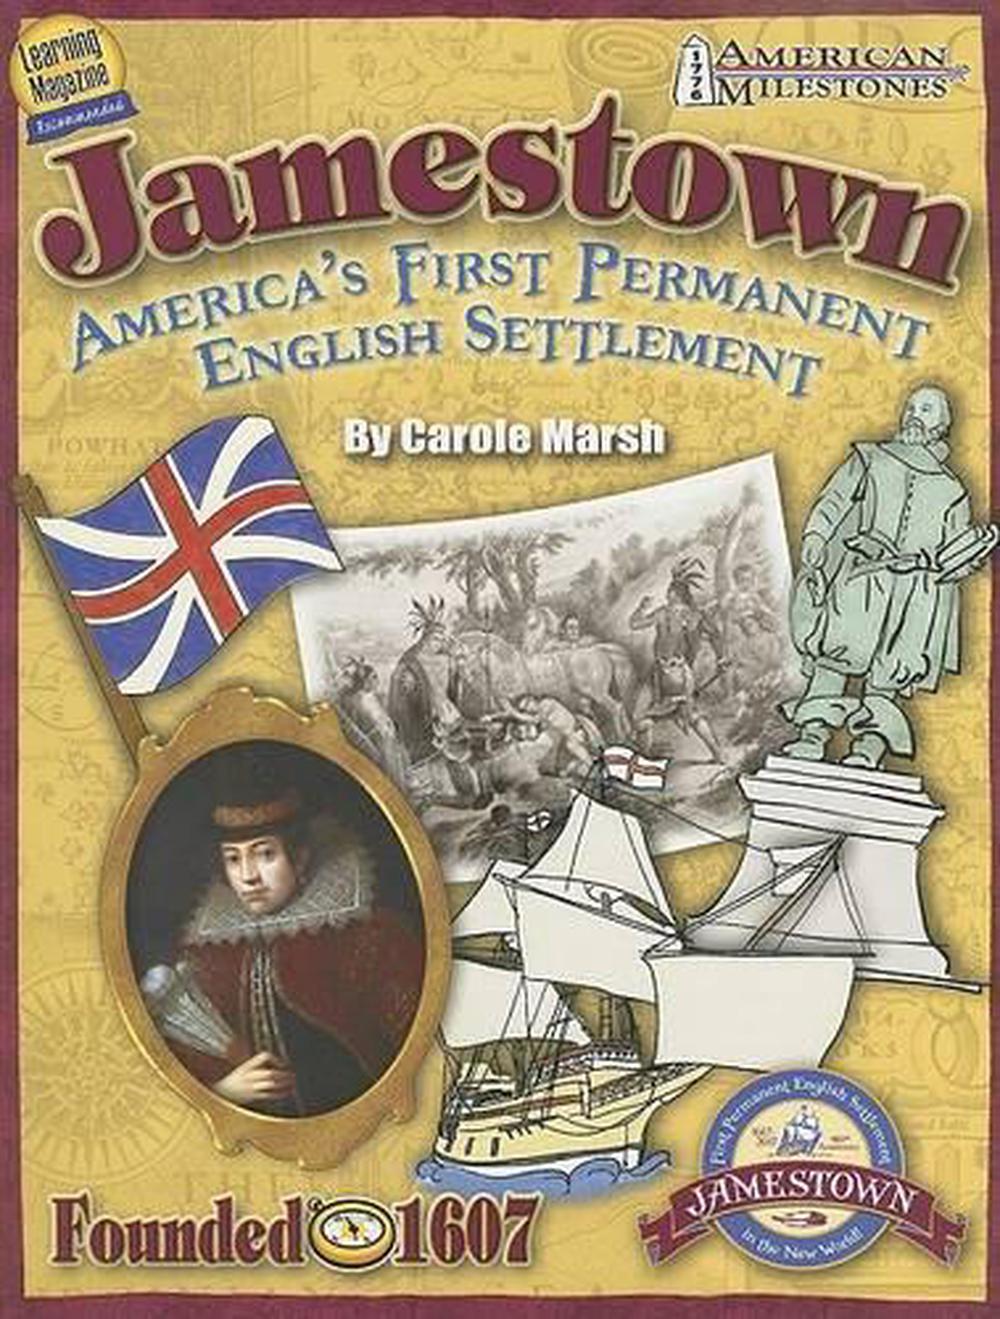 jamestown-the-first-permanent-english-settlement-youtube